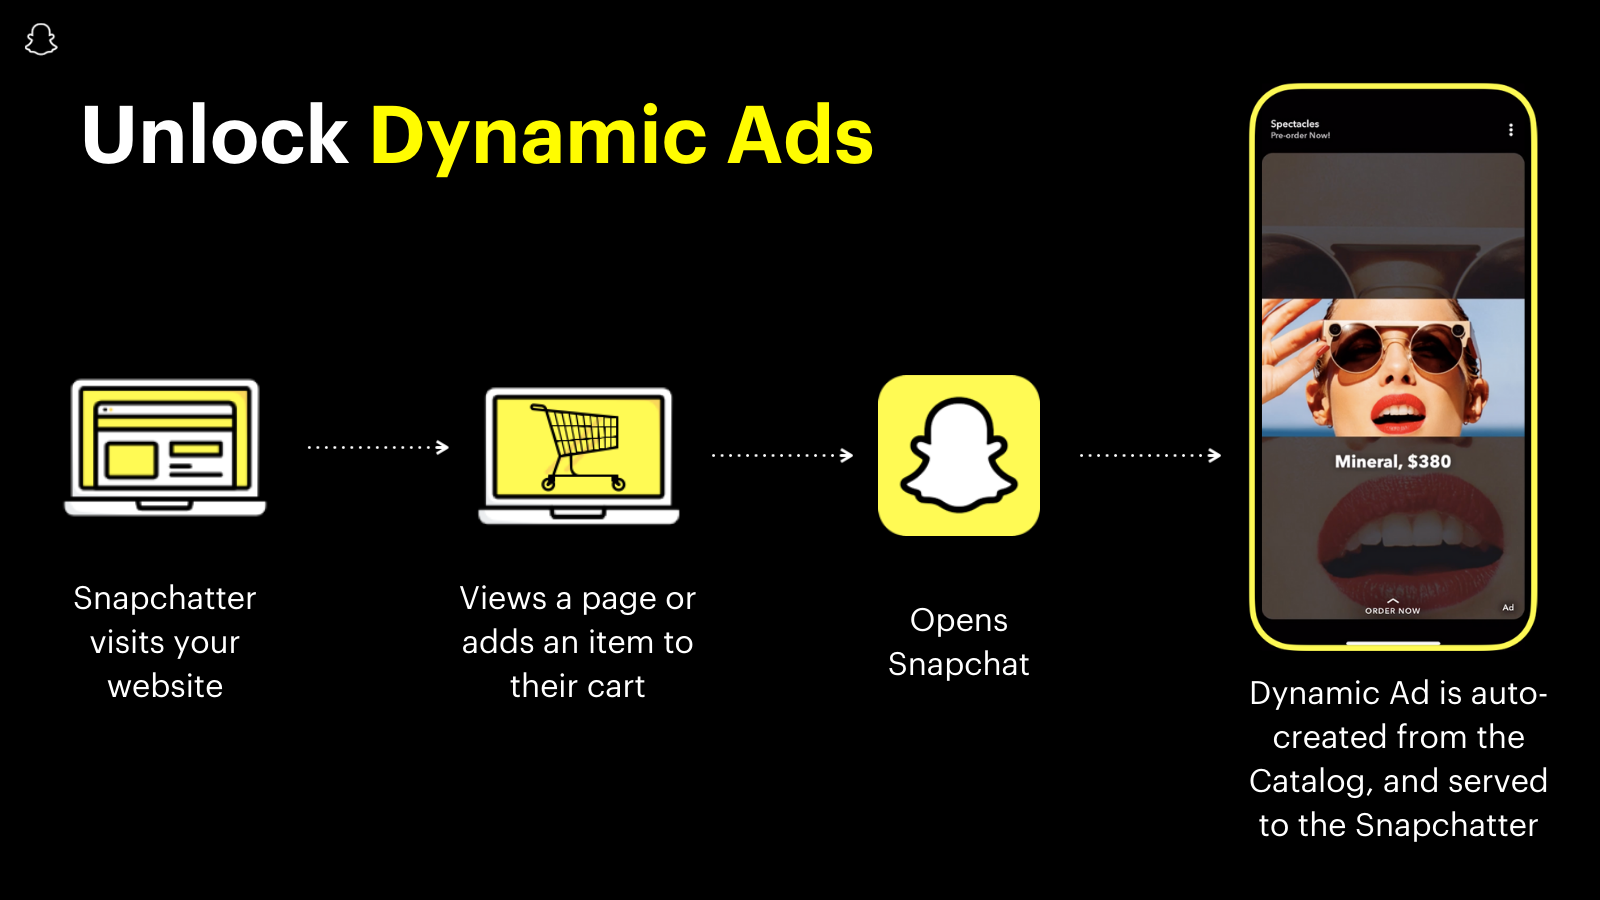 Unlock Snapchat's Dynamic Ads, automated and personalized ads